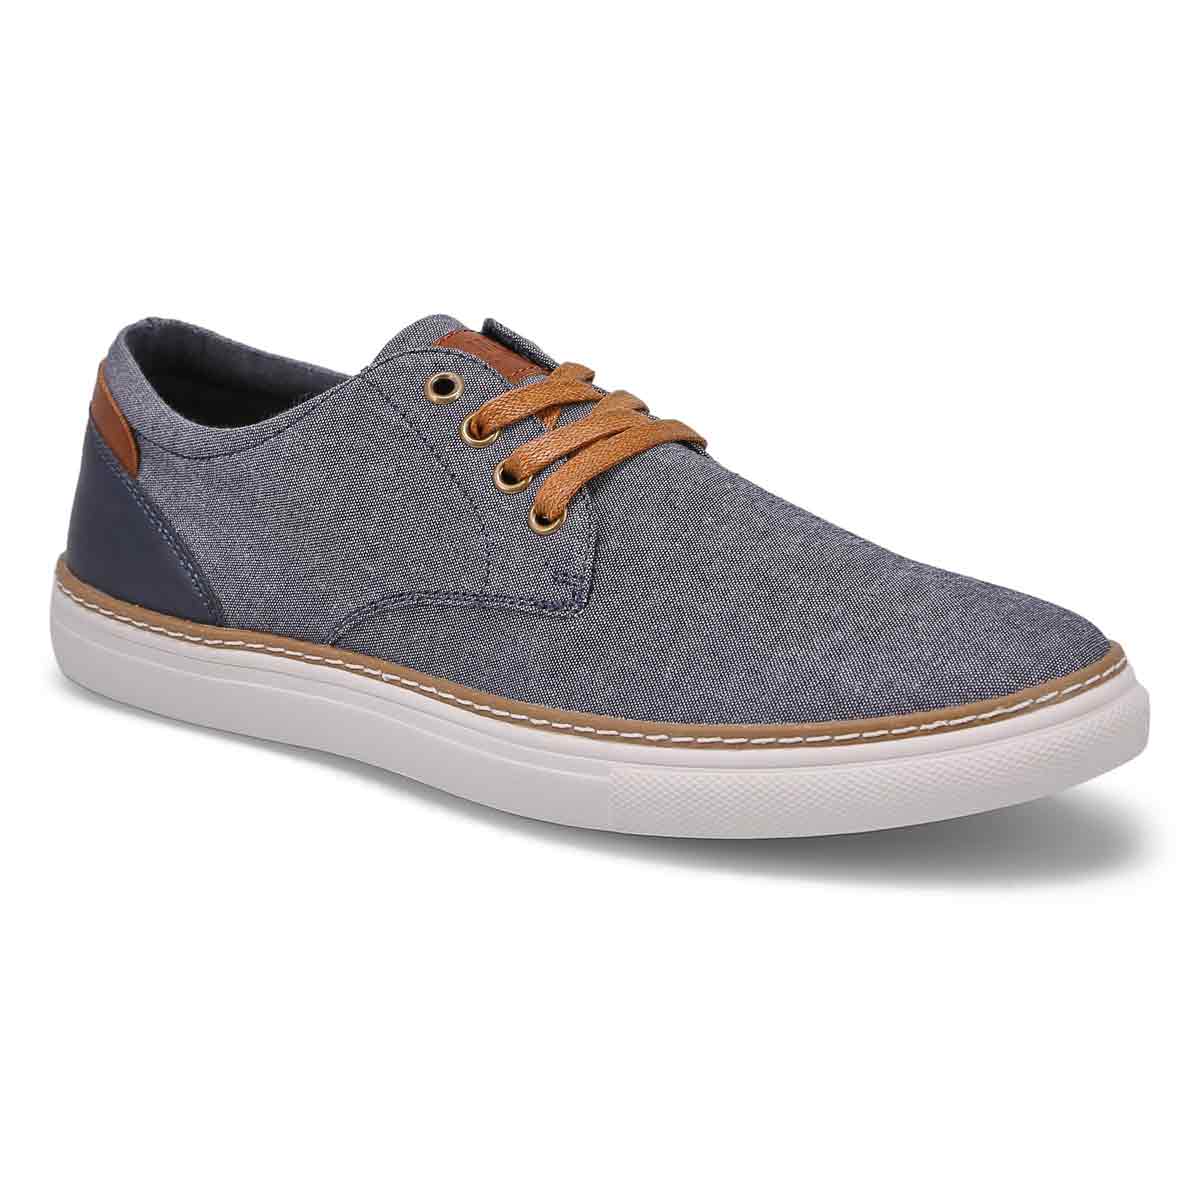 Men's P-Alive Lace Up Casual Sneaker - Navy